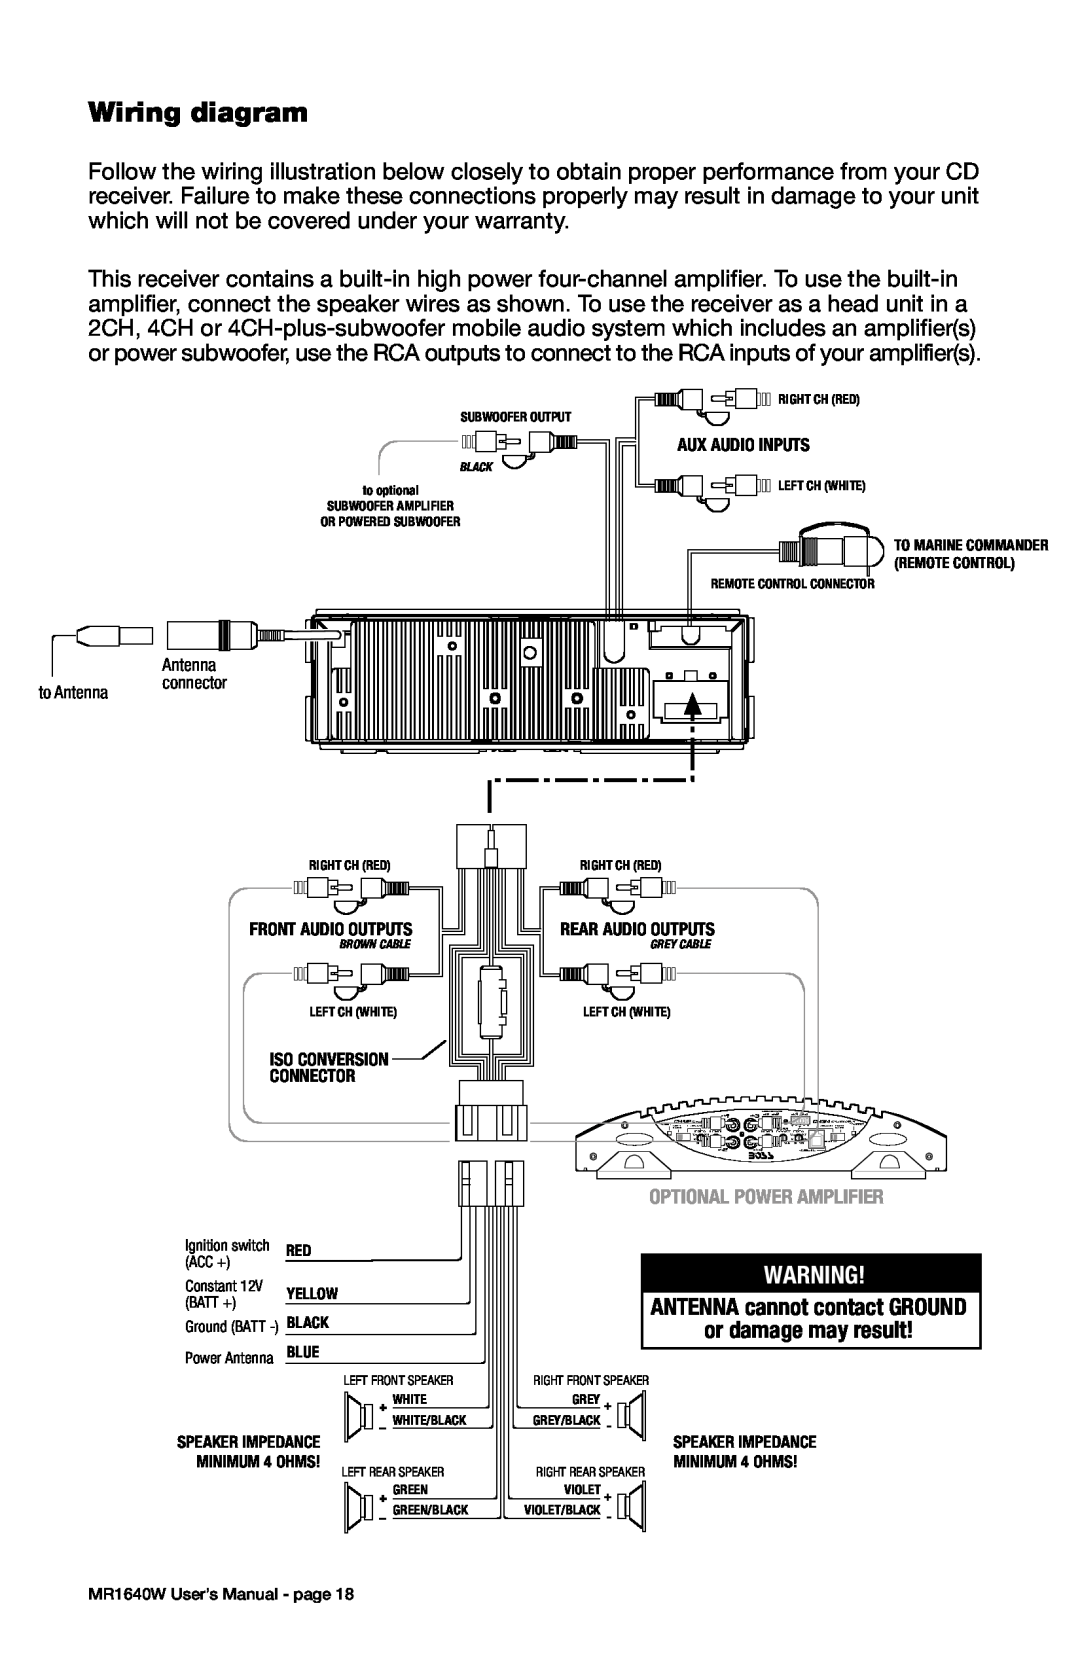 Boss Audio Systems MR1640W manual Wiring diagram, ANTENNA cannot contact GROUND, or damage may result 